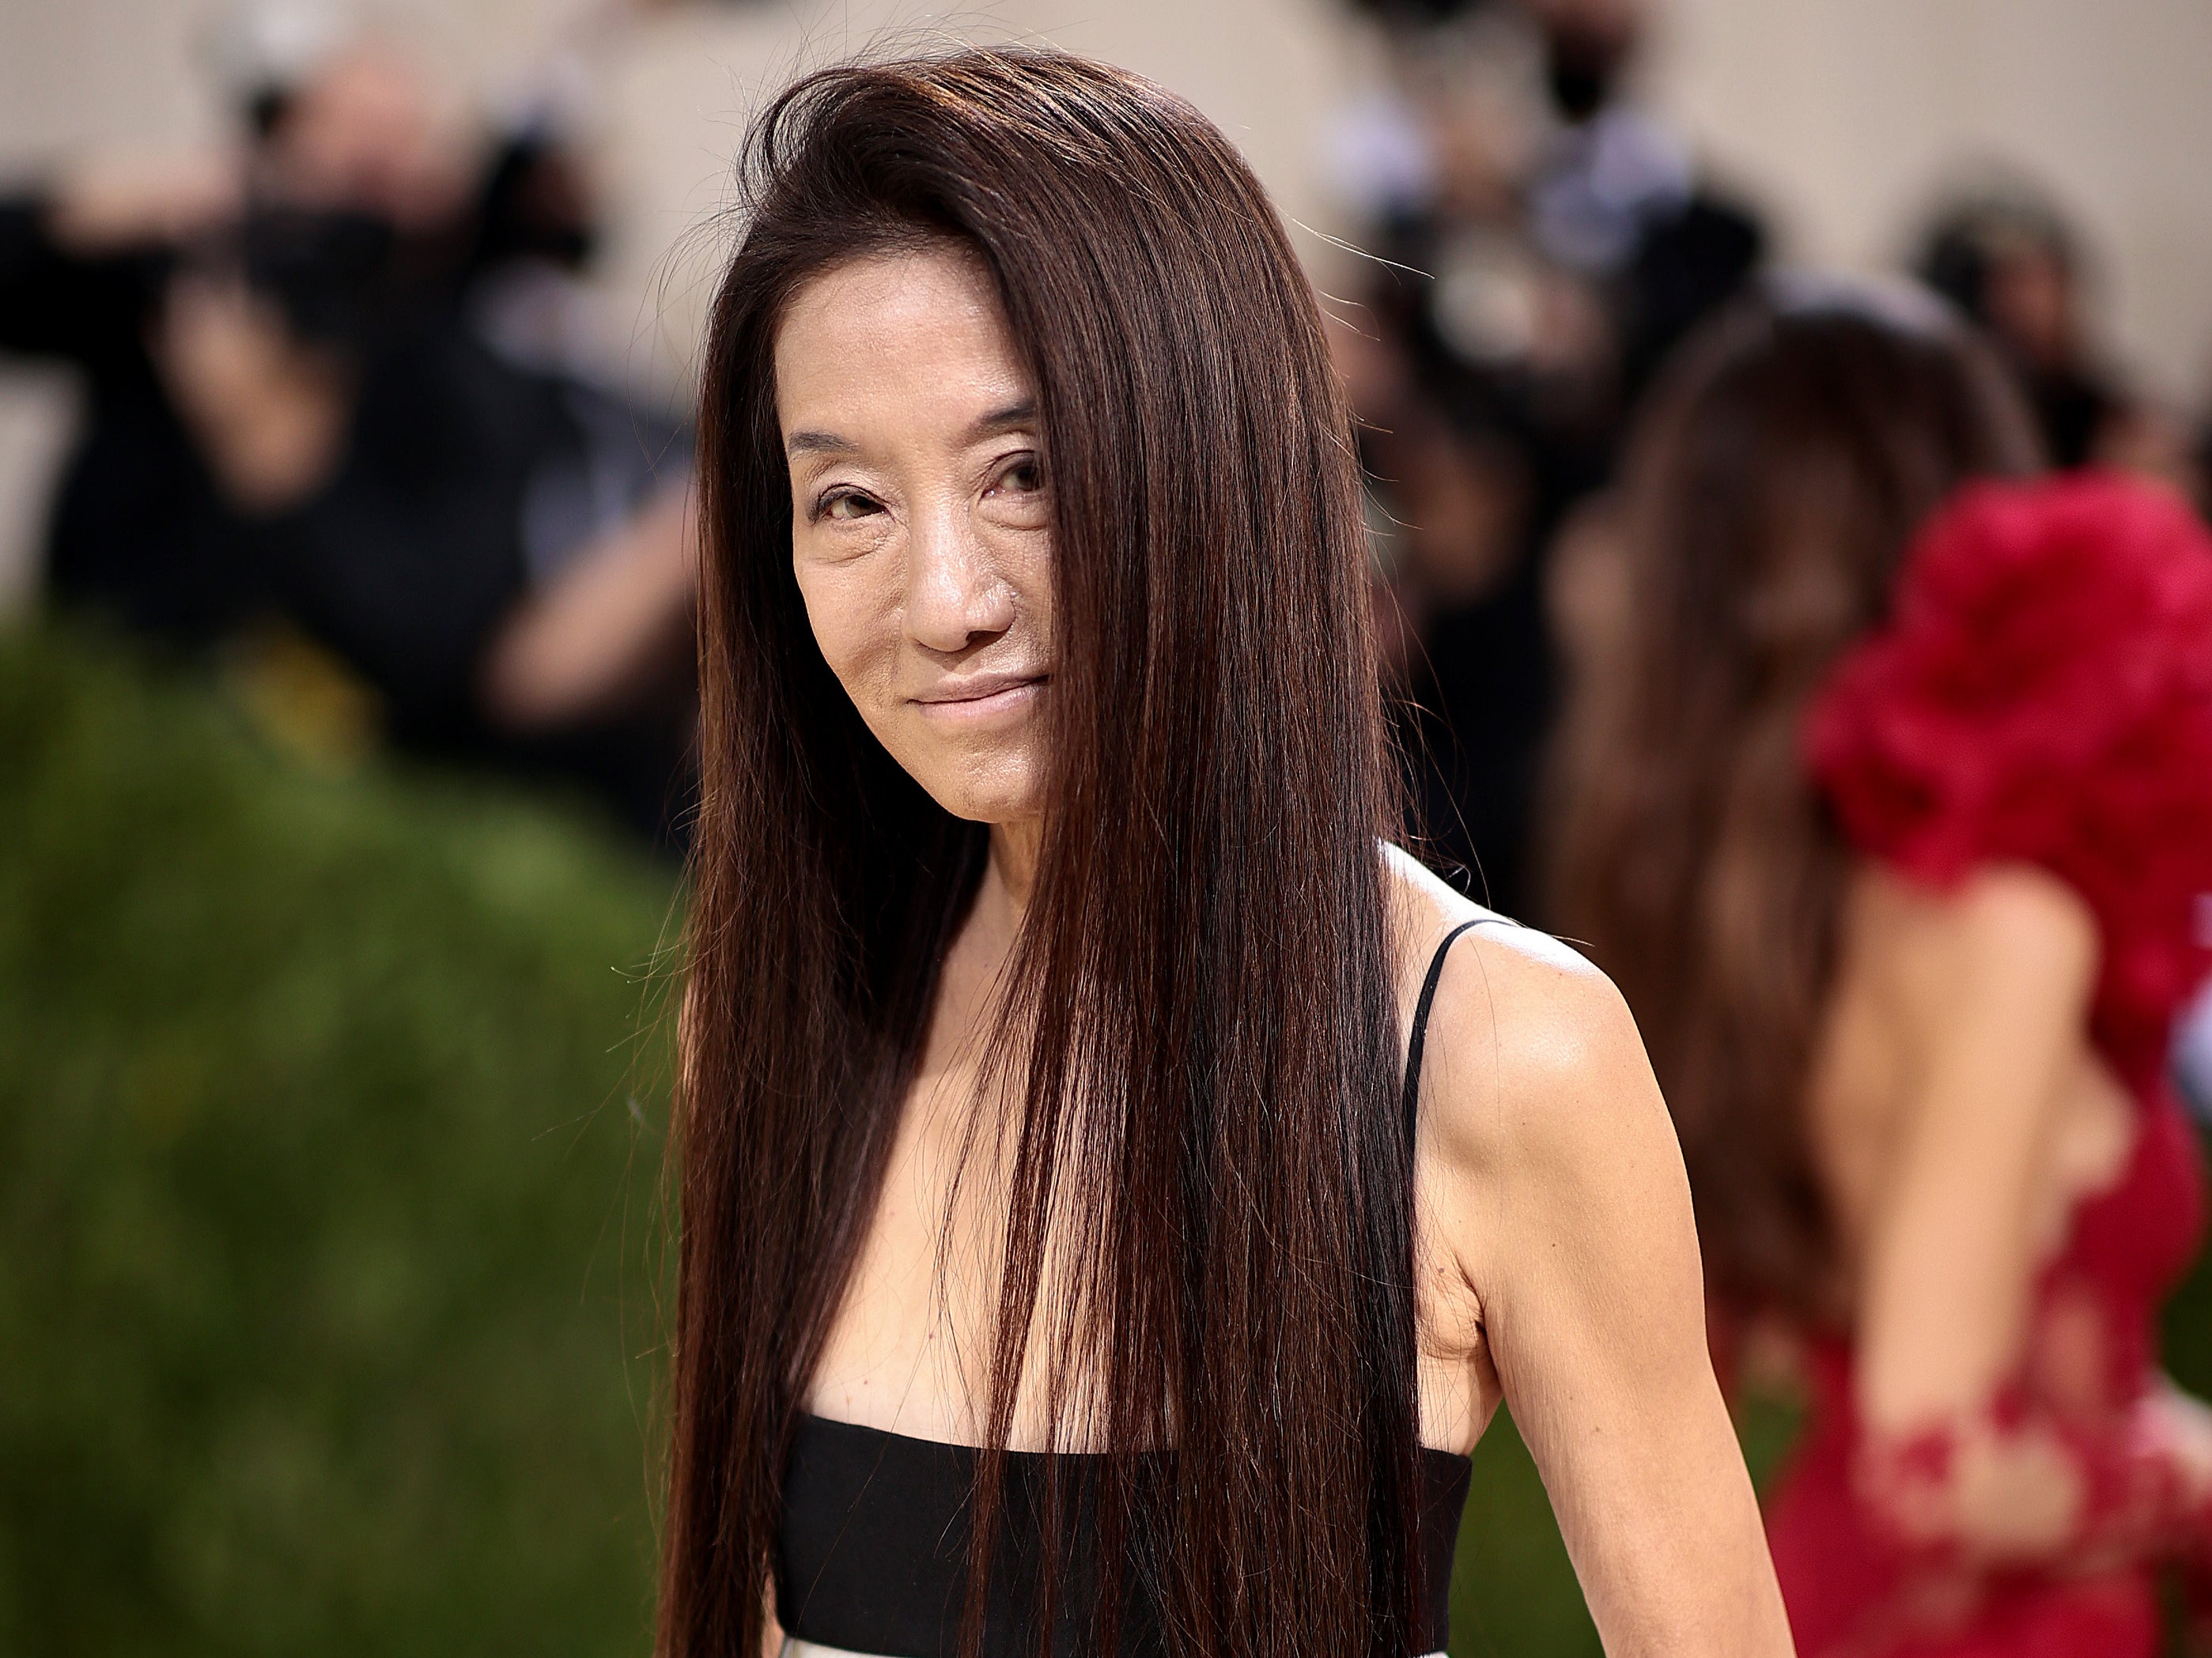 Vera Wang says ageism is ‘so oldfashioned’ and reveals she has a vodka